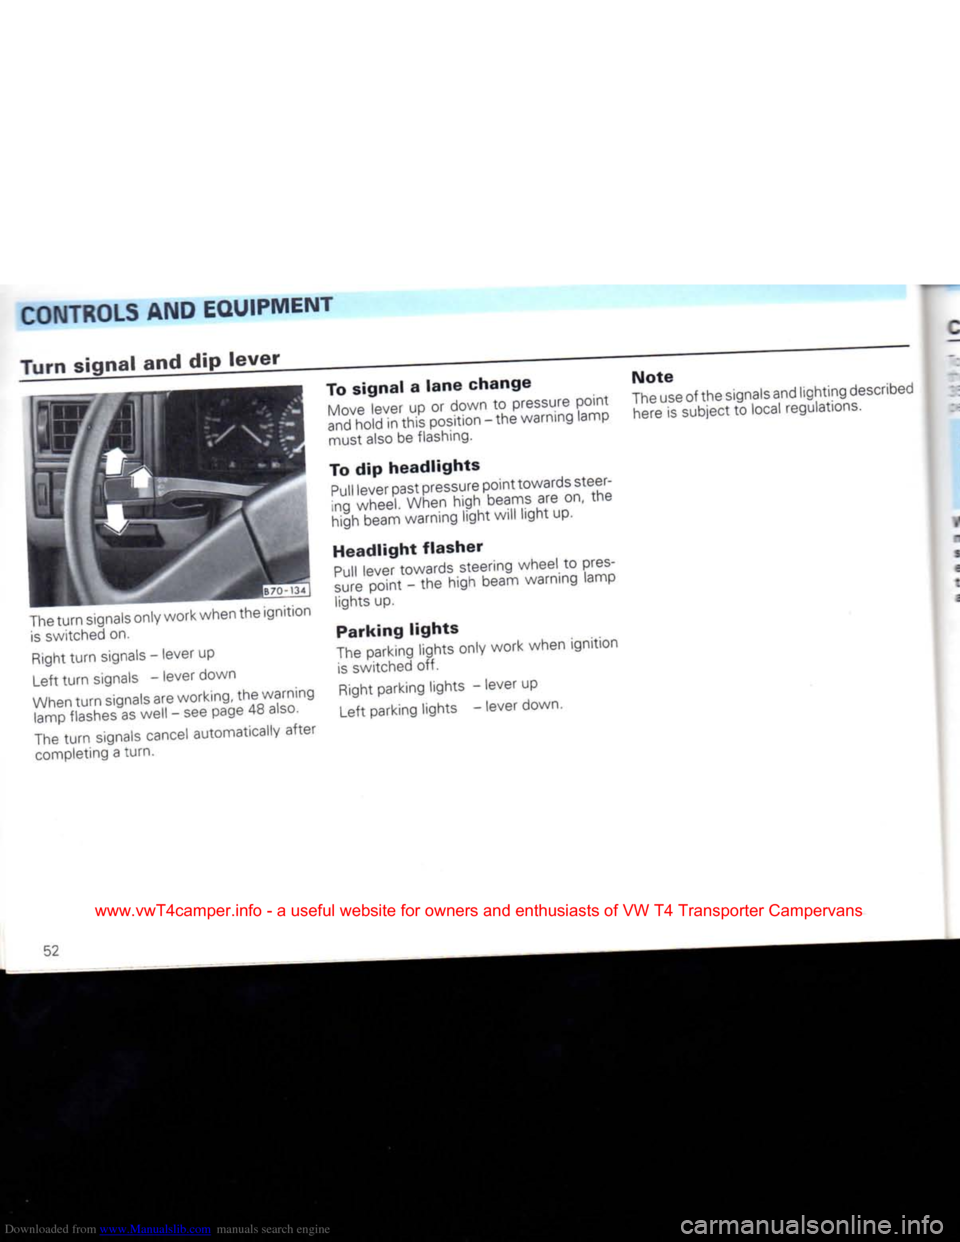 VOLKSWAGEN CARAVELLE 1992 T4 / 4.G Owners Manual Downloaded from www.Manualslib.com manuals search engine 
CONTROLS
 AND EQUIPMENT 
Turn signal and dip
 lever 

The
 turn
 signals only work when the ignition 
 is
 switched on. 

Right
 turn
 signals